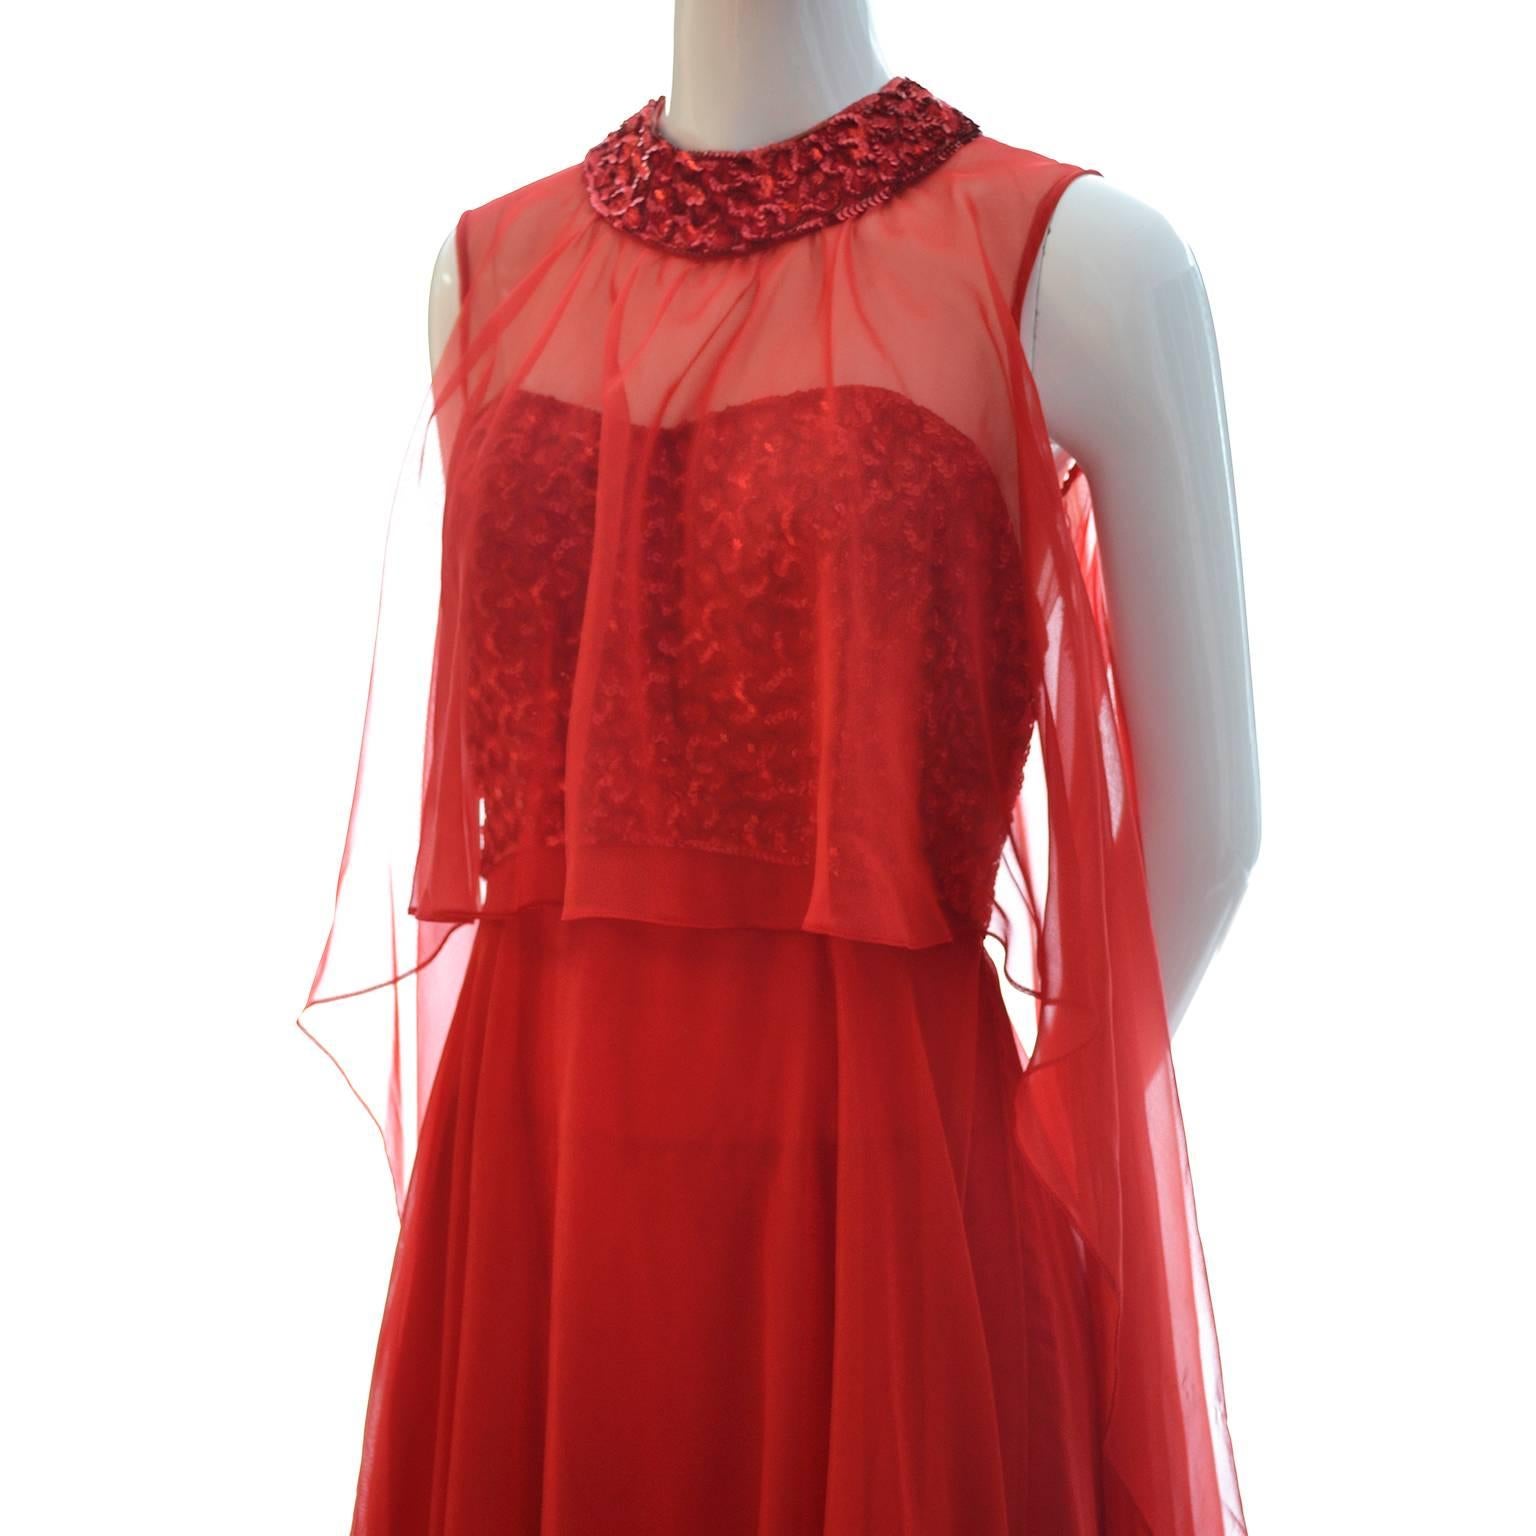 1970s Mike Benet Vintage Dress in Lipstick Red With Sequins & Sheer Overlay 3